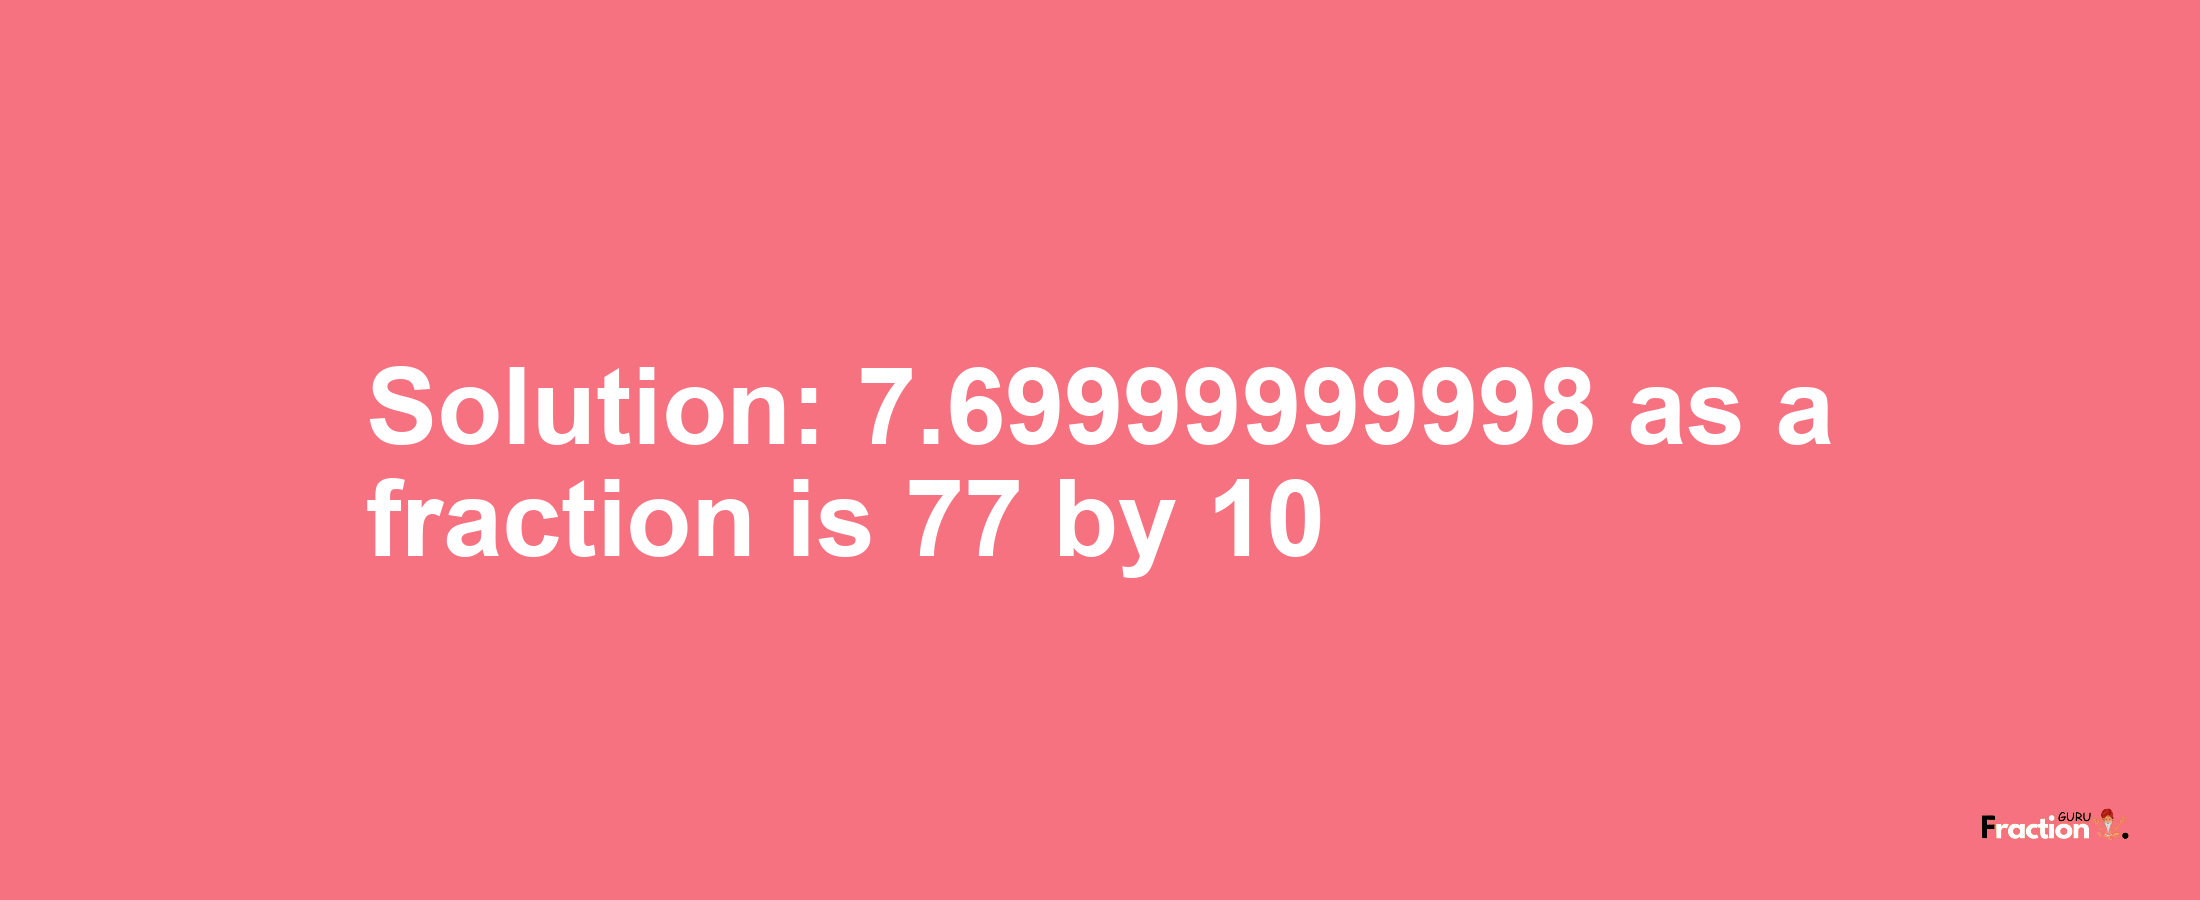 Solution:7.69999999998 as a fraction is 77/10